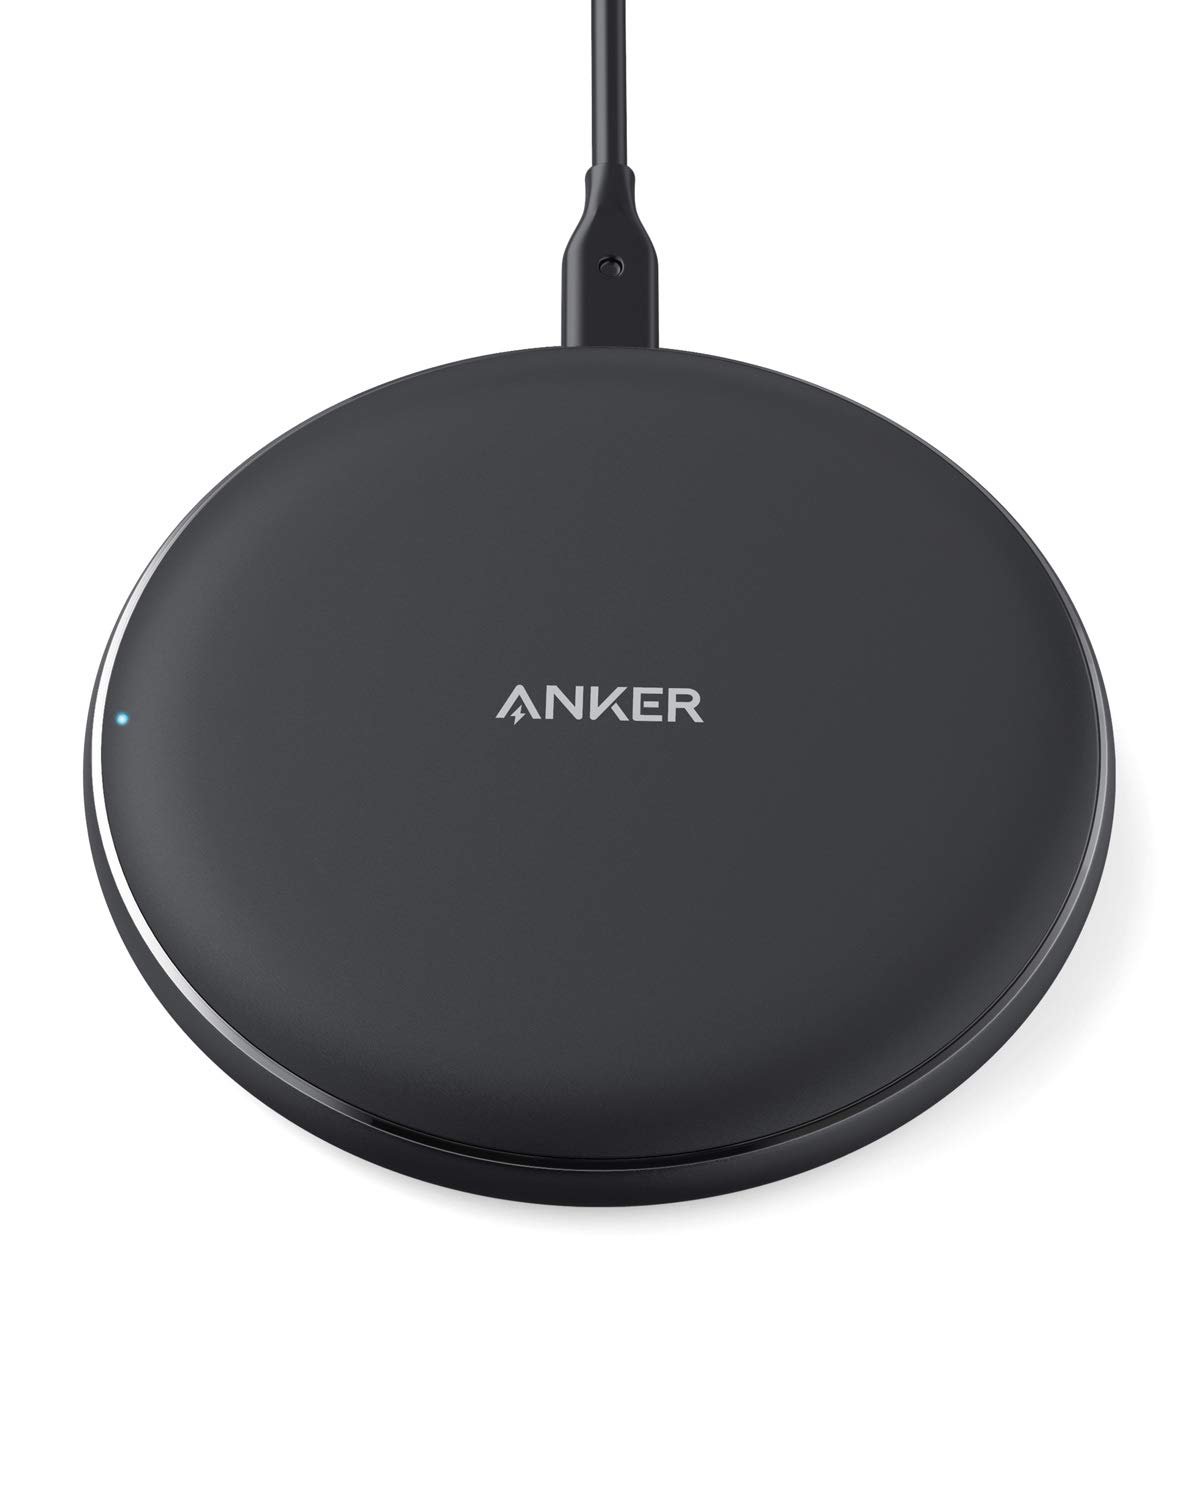 ANKER POWERWAVE 7.5 FAST WIRELESS CHARGING PAD WITH INTERNAL COOLING FAN